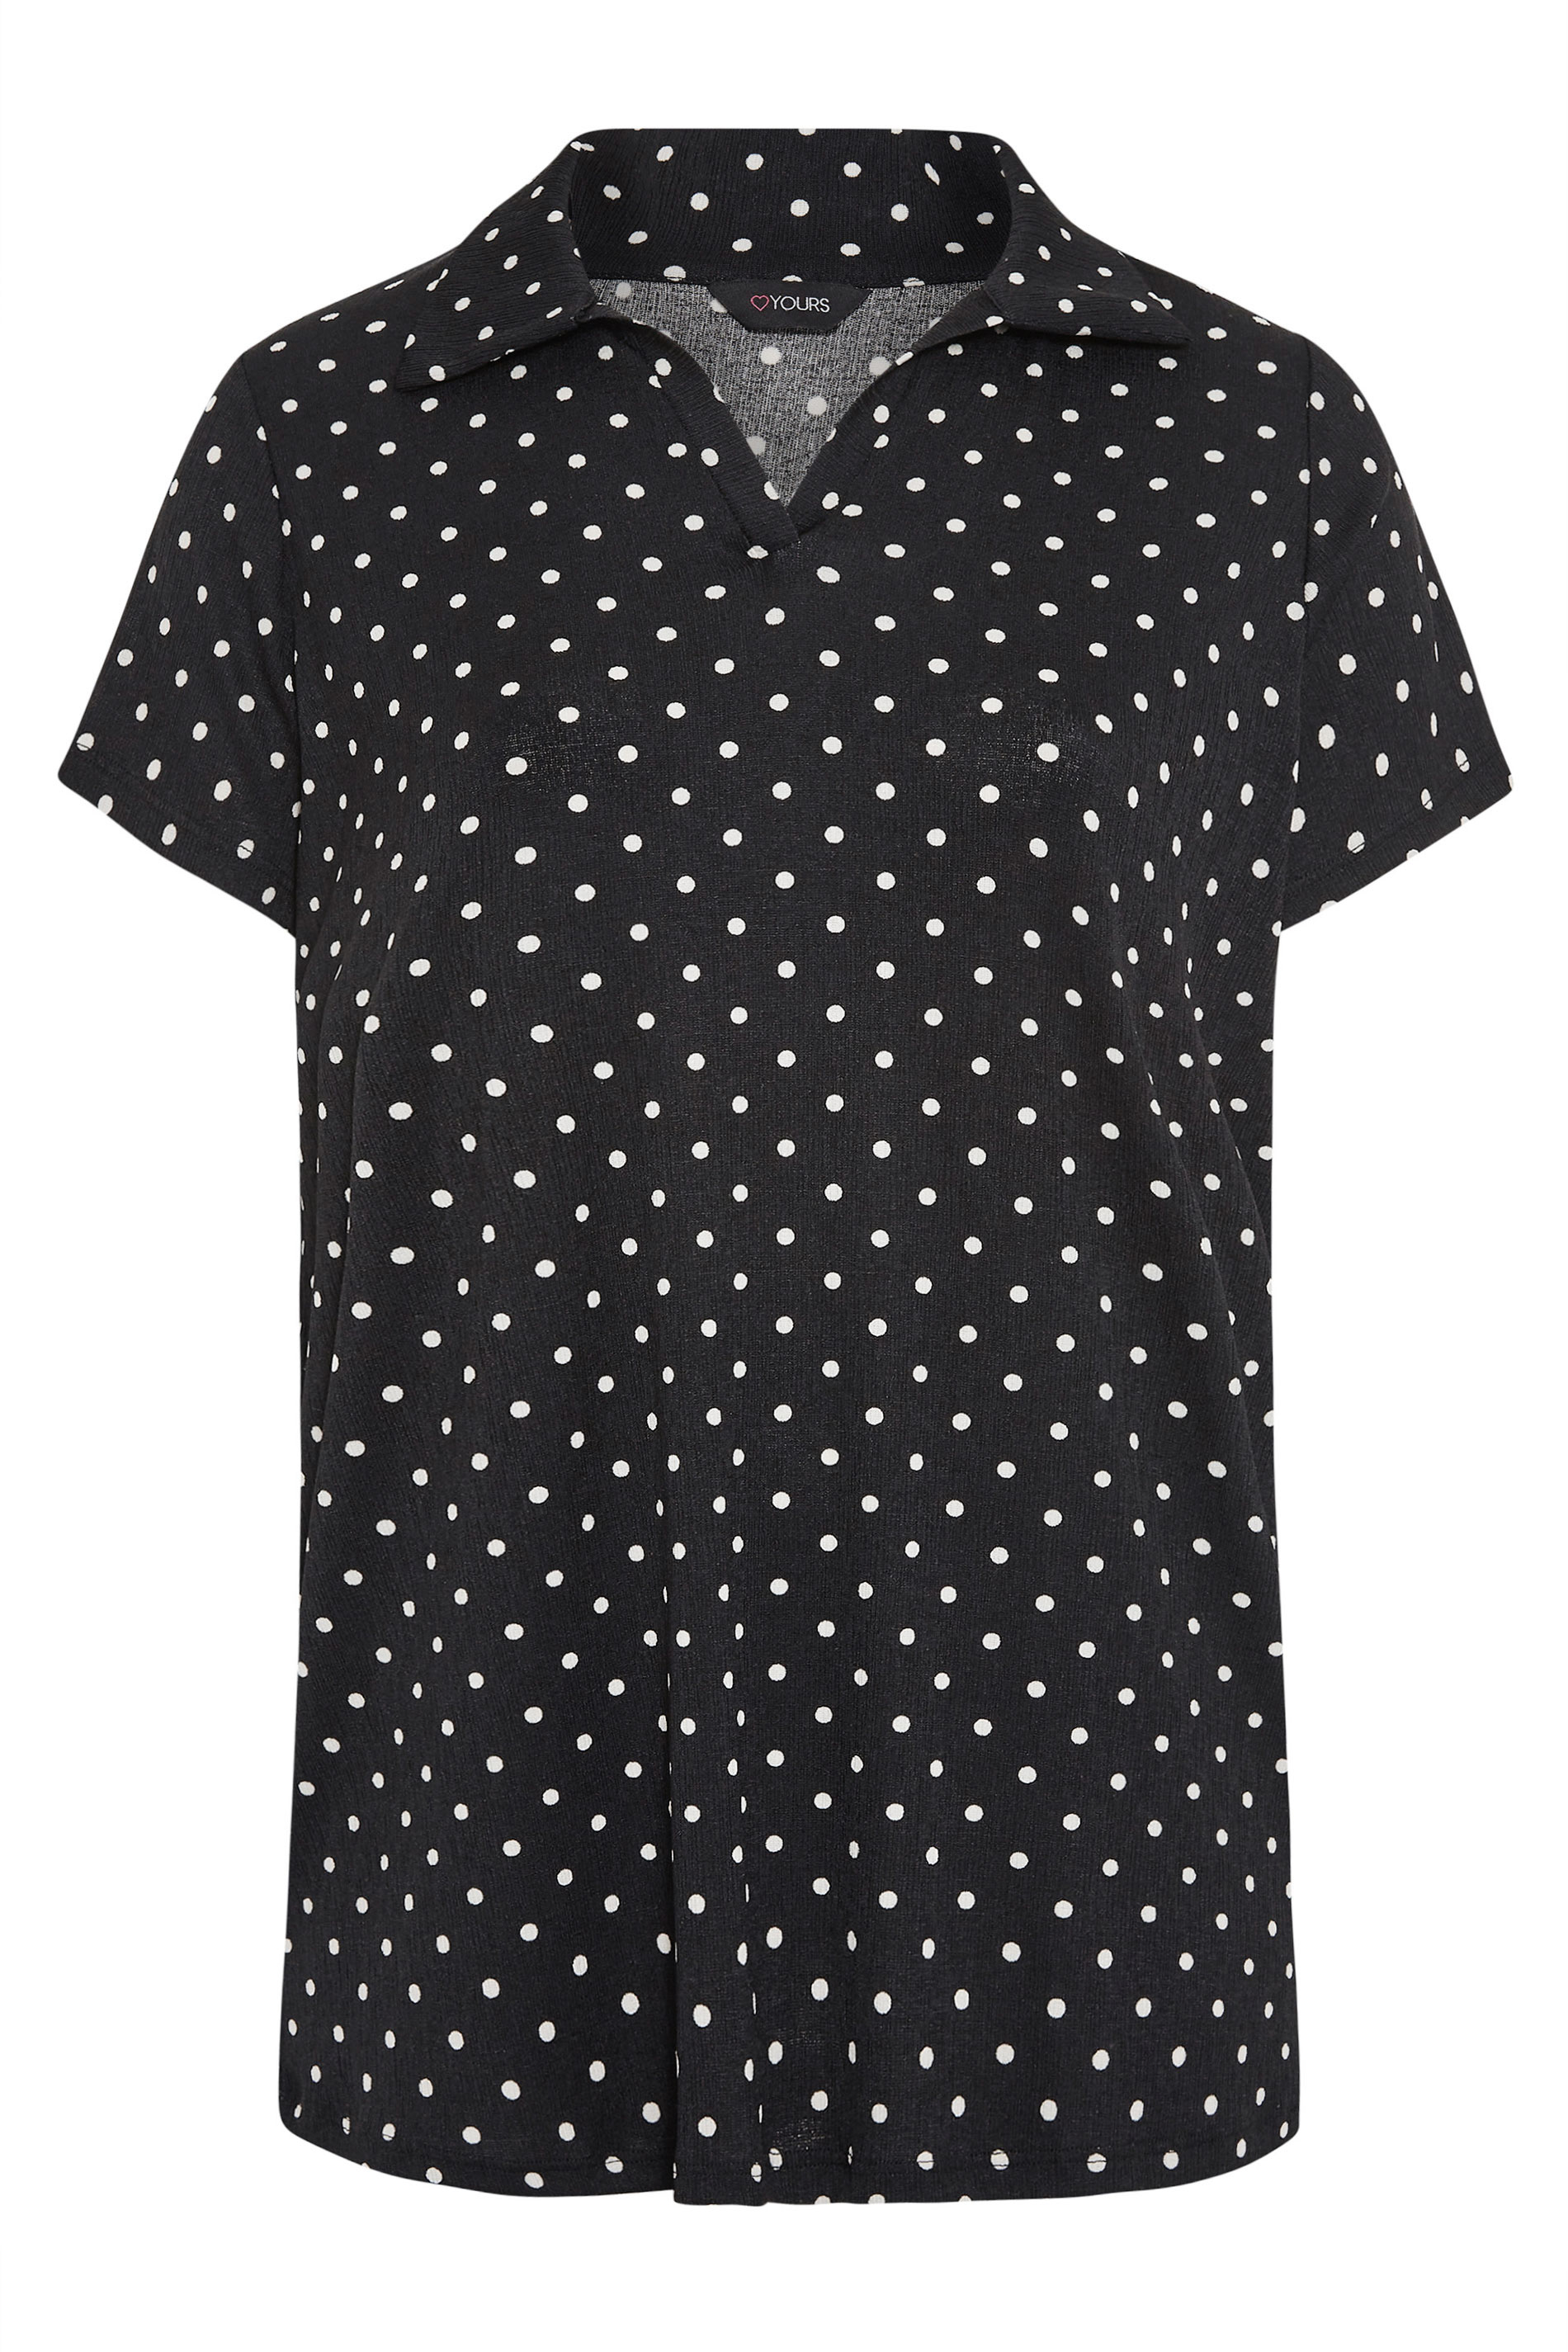 Black Polka Dot Textured Polo Top | Yours Clothing